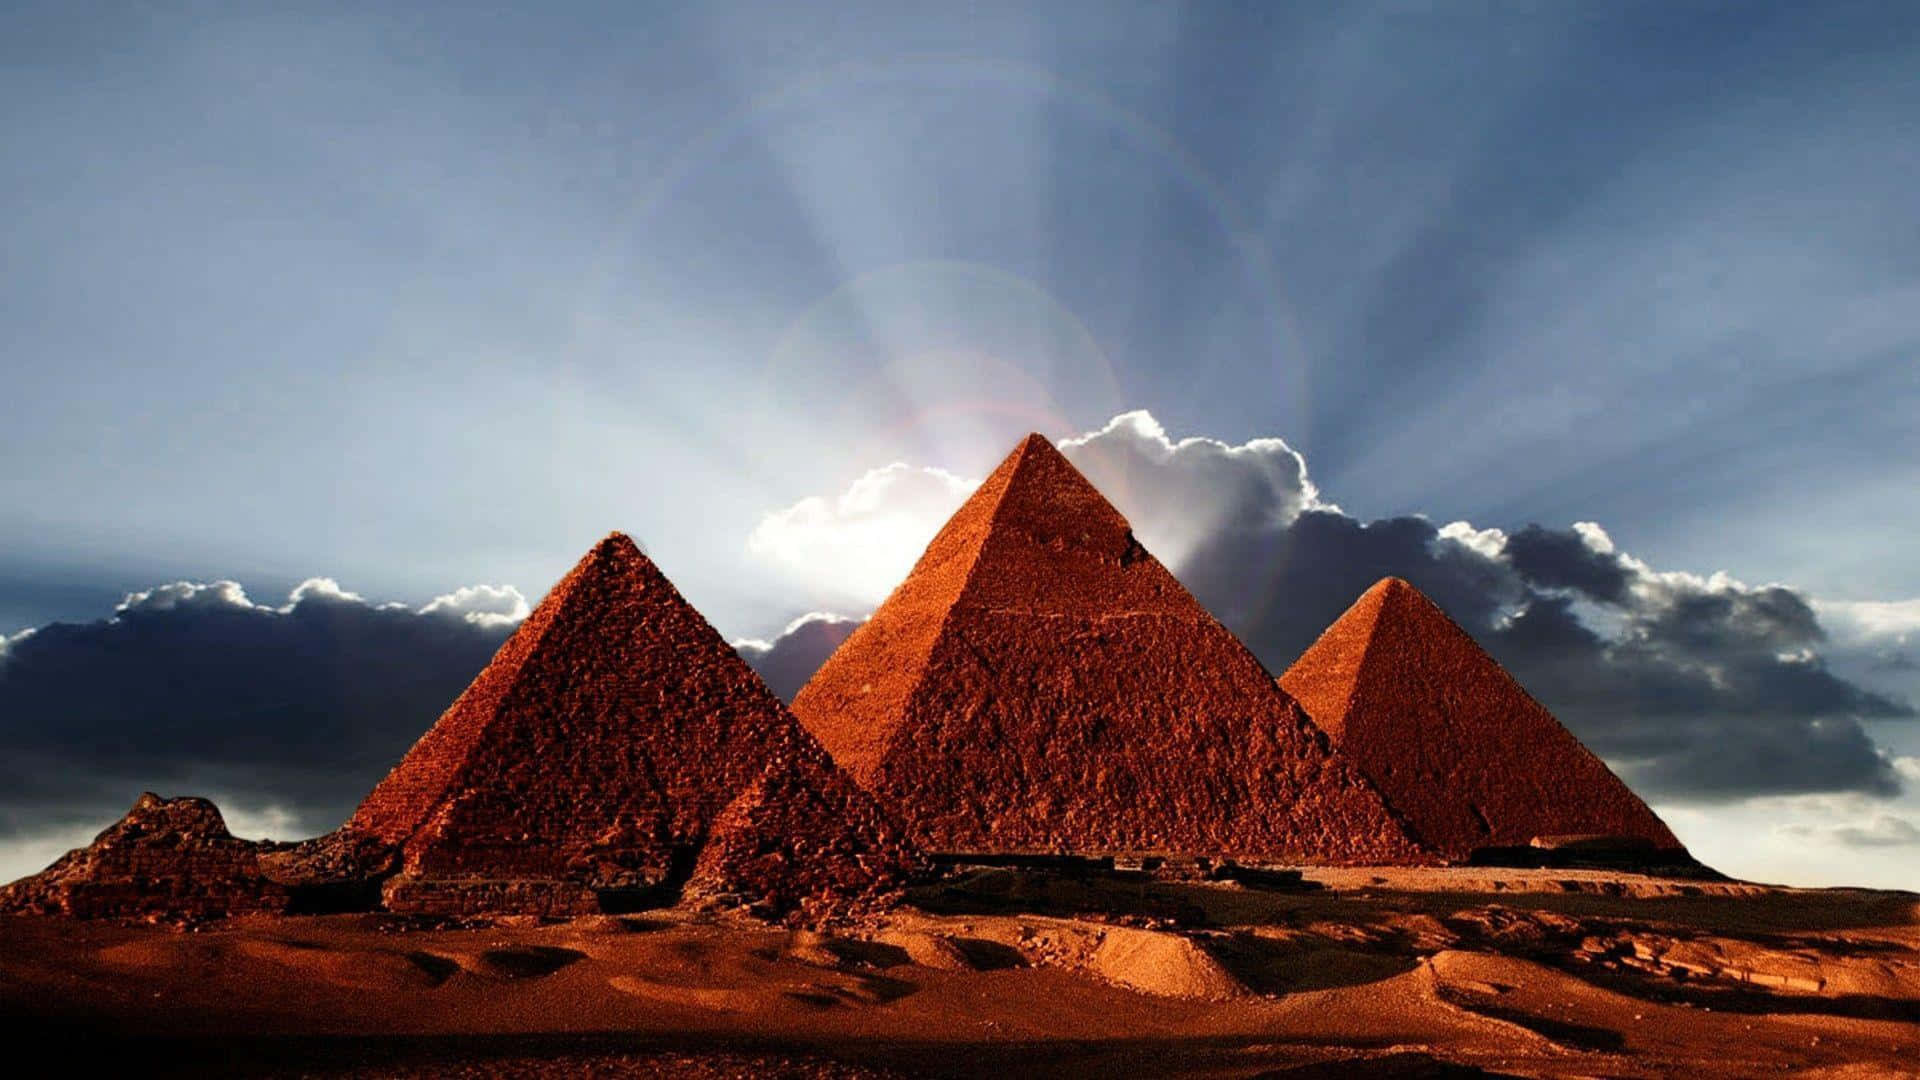 A picturesque view of the sunset over the Giza pyramids in Egypt